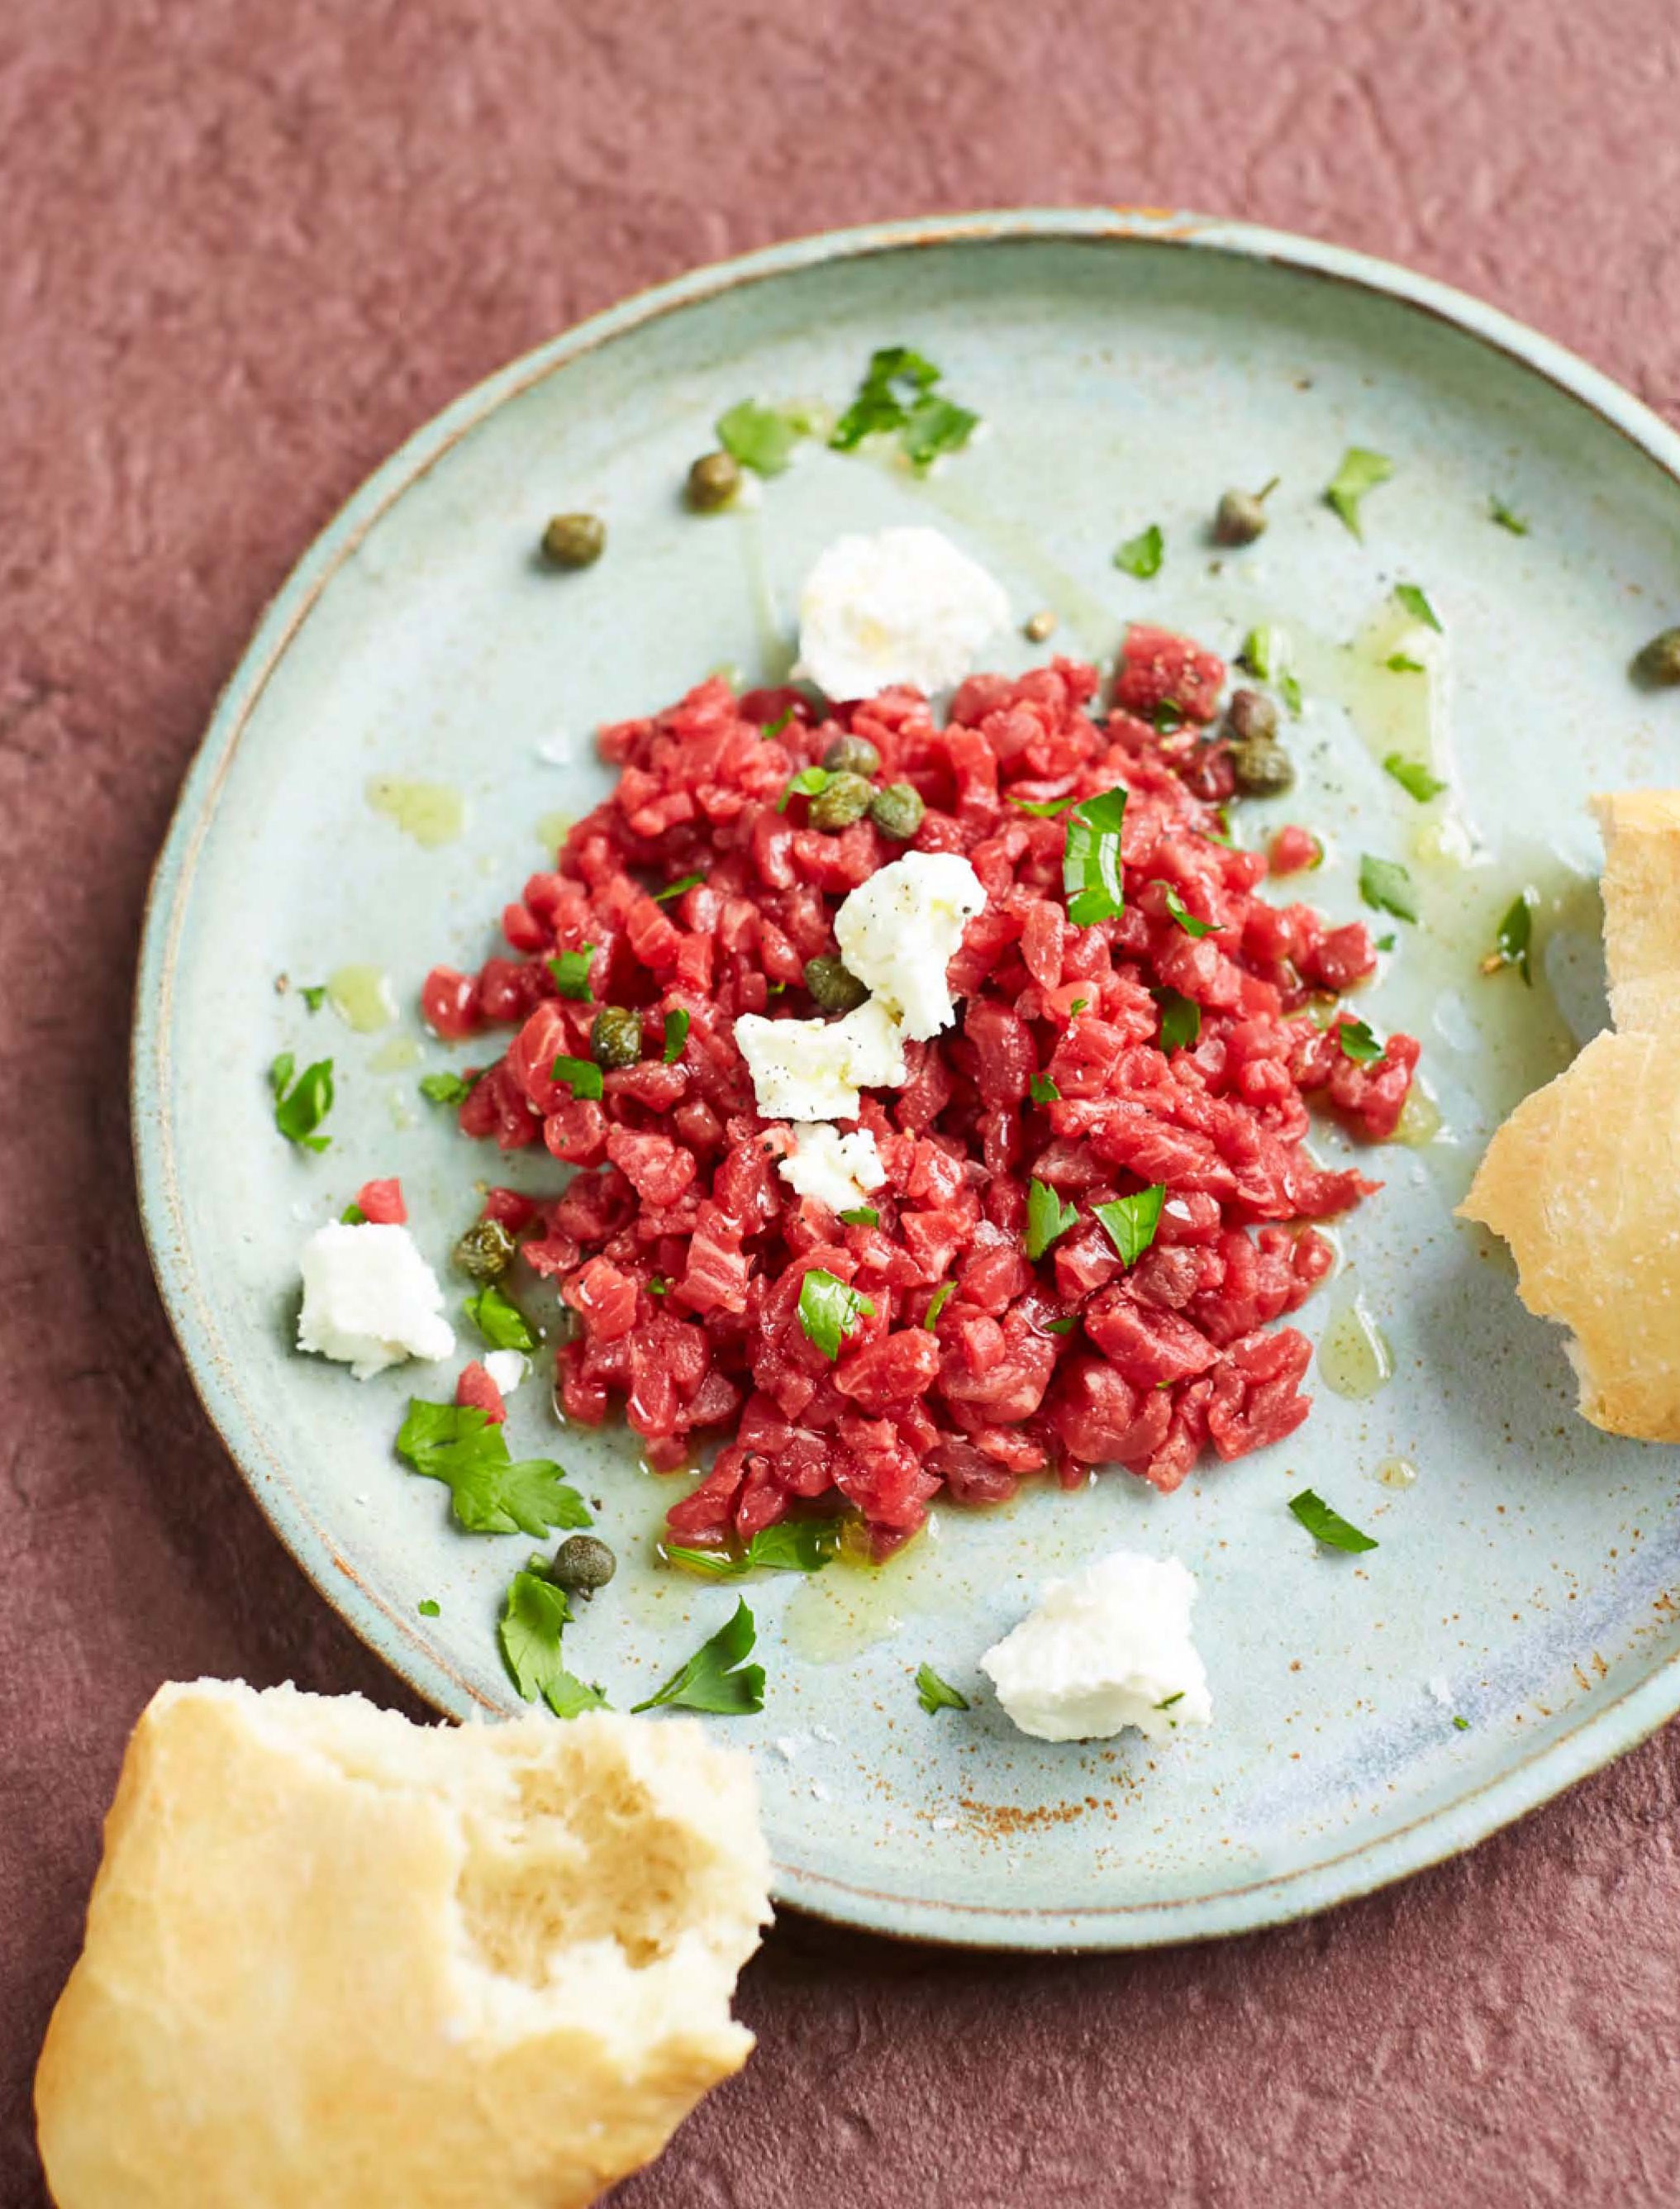 Steak tartare with pitta bread and curd cheese from Prue: My All-time Favourite Recipes by Prue ...